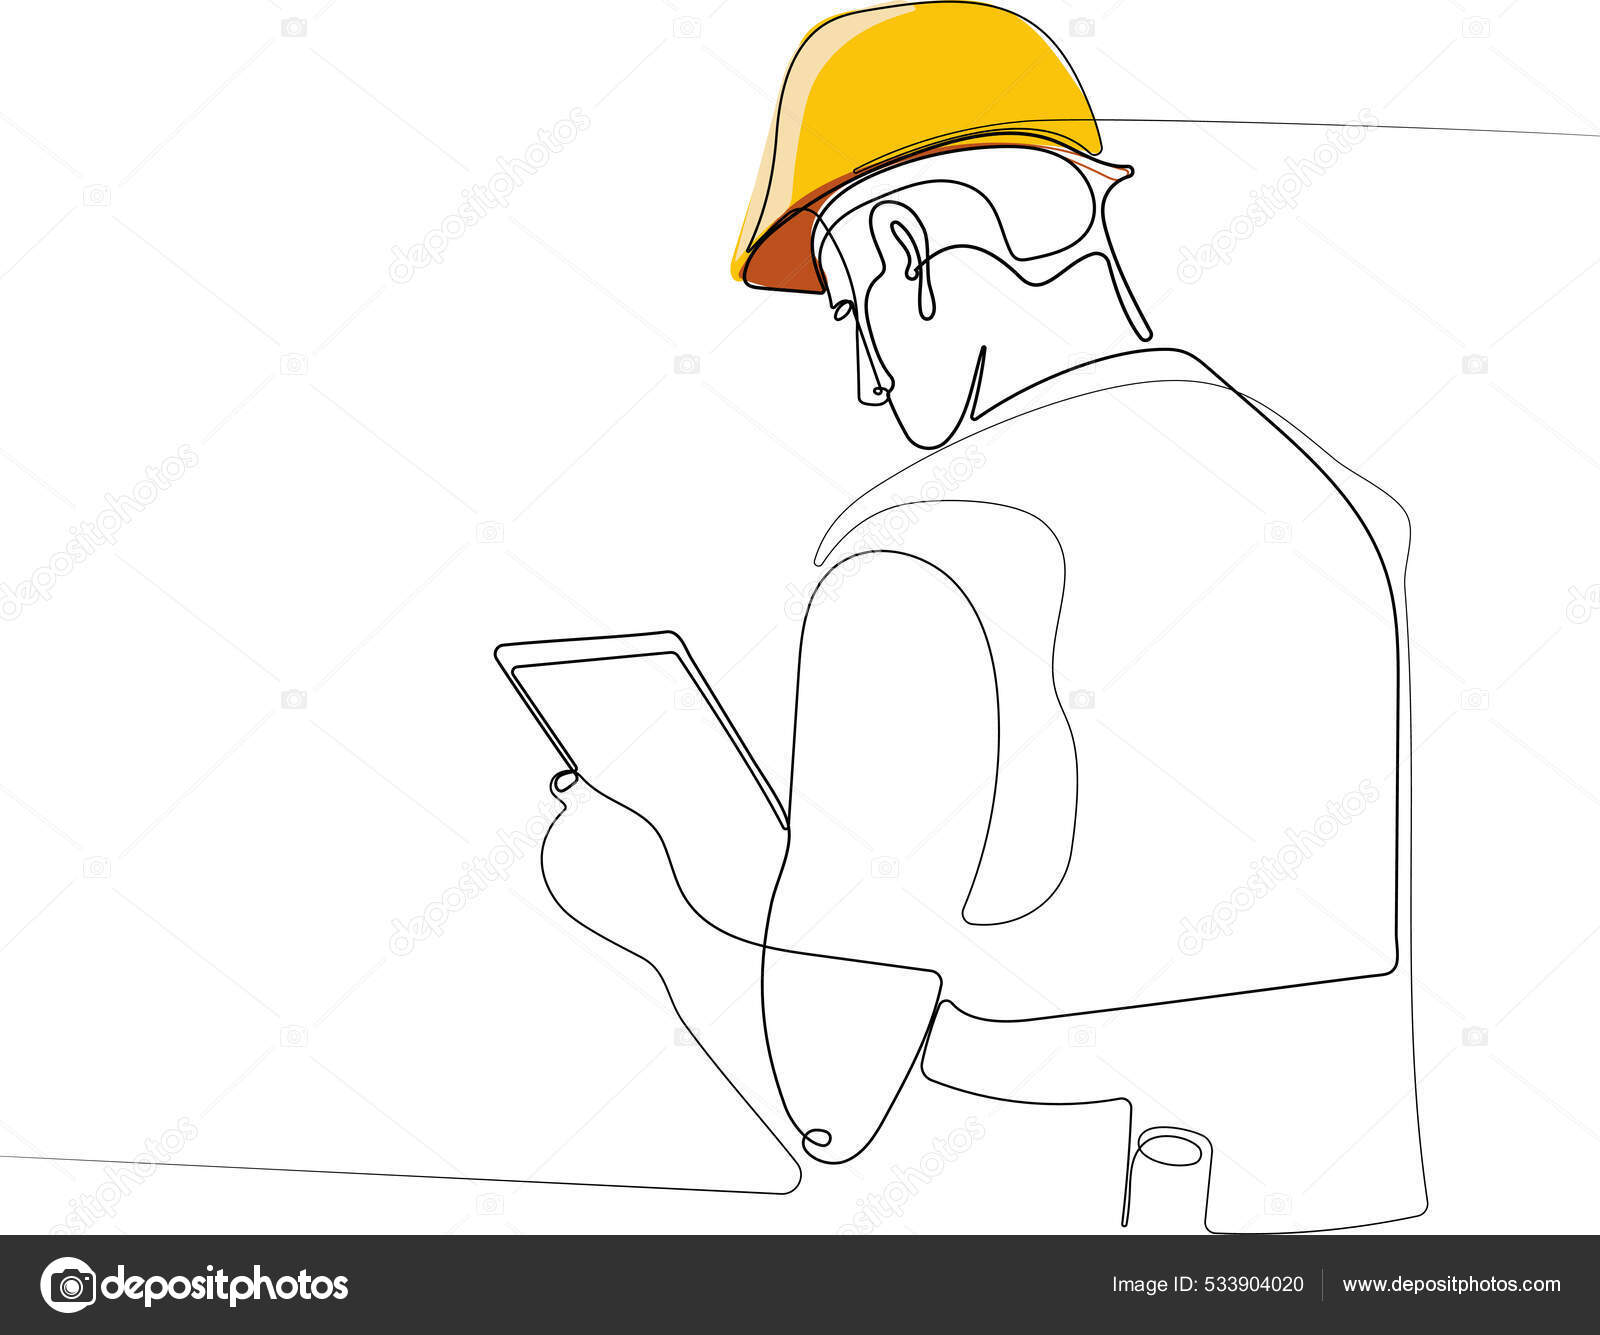 Safety helmet icon doodle hand drawn or outline Vector Image